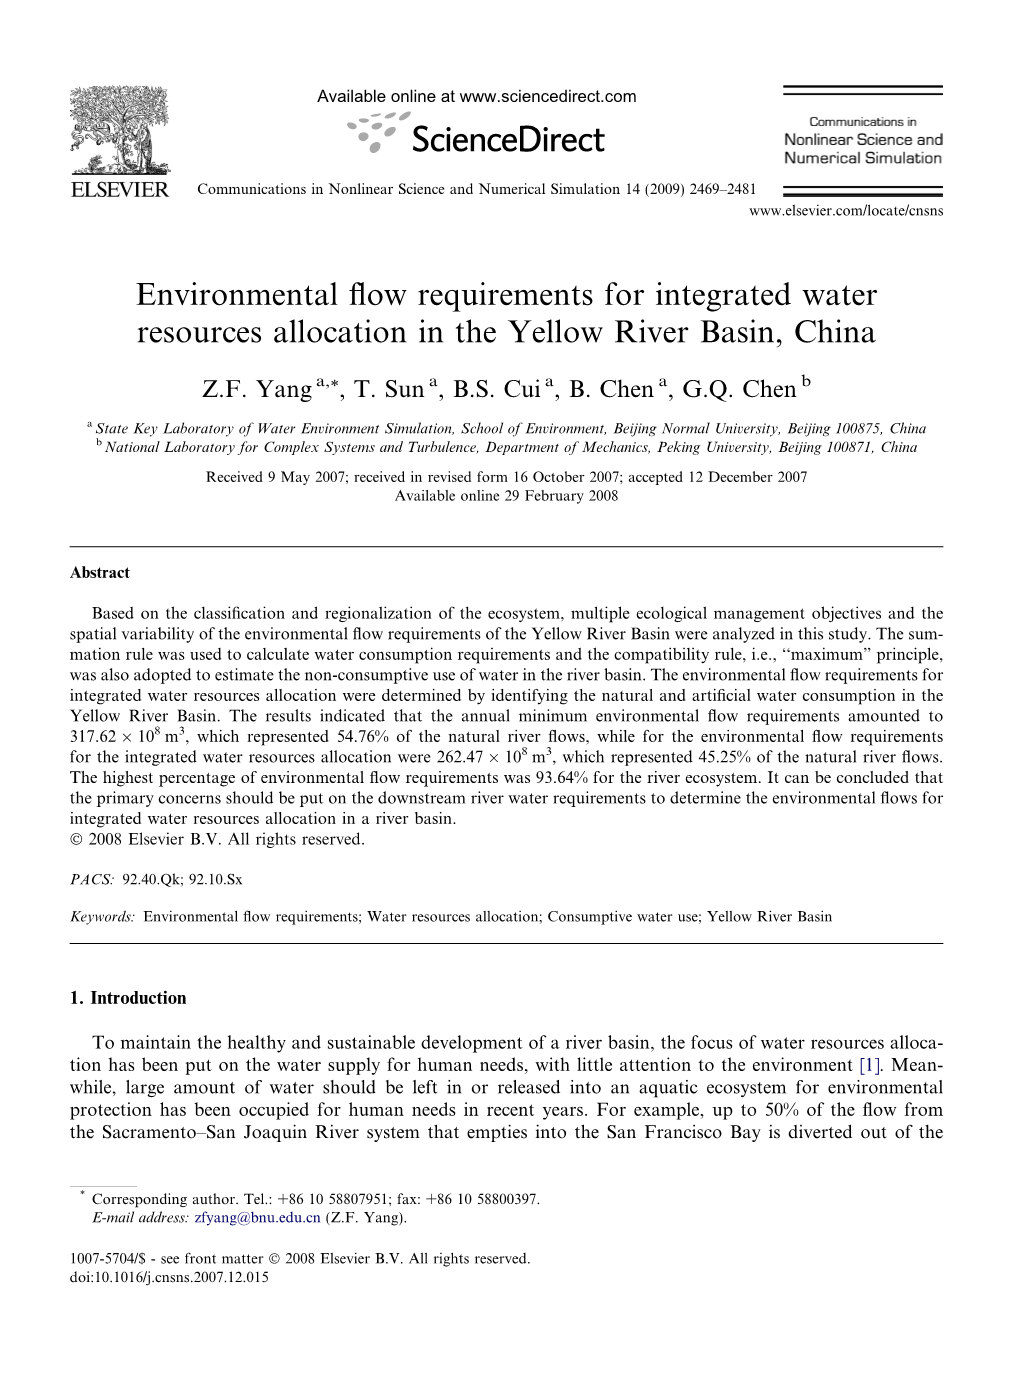 Environmental Flow Requirements for Integrated Water Resources